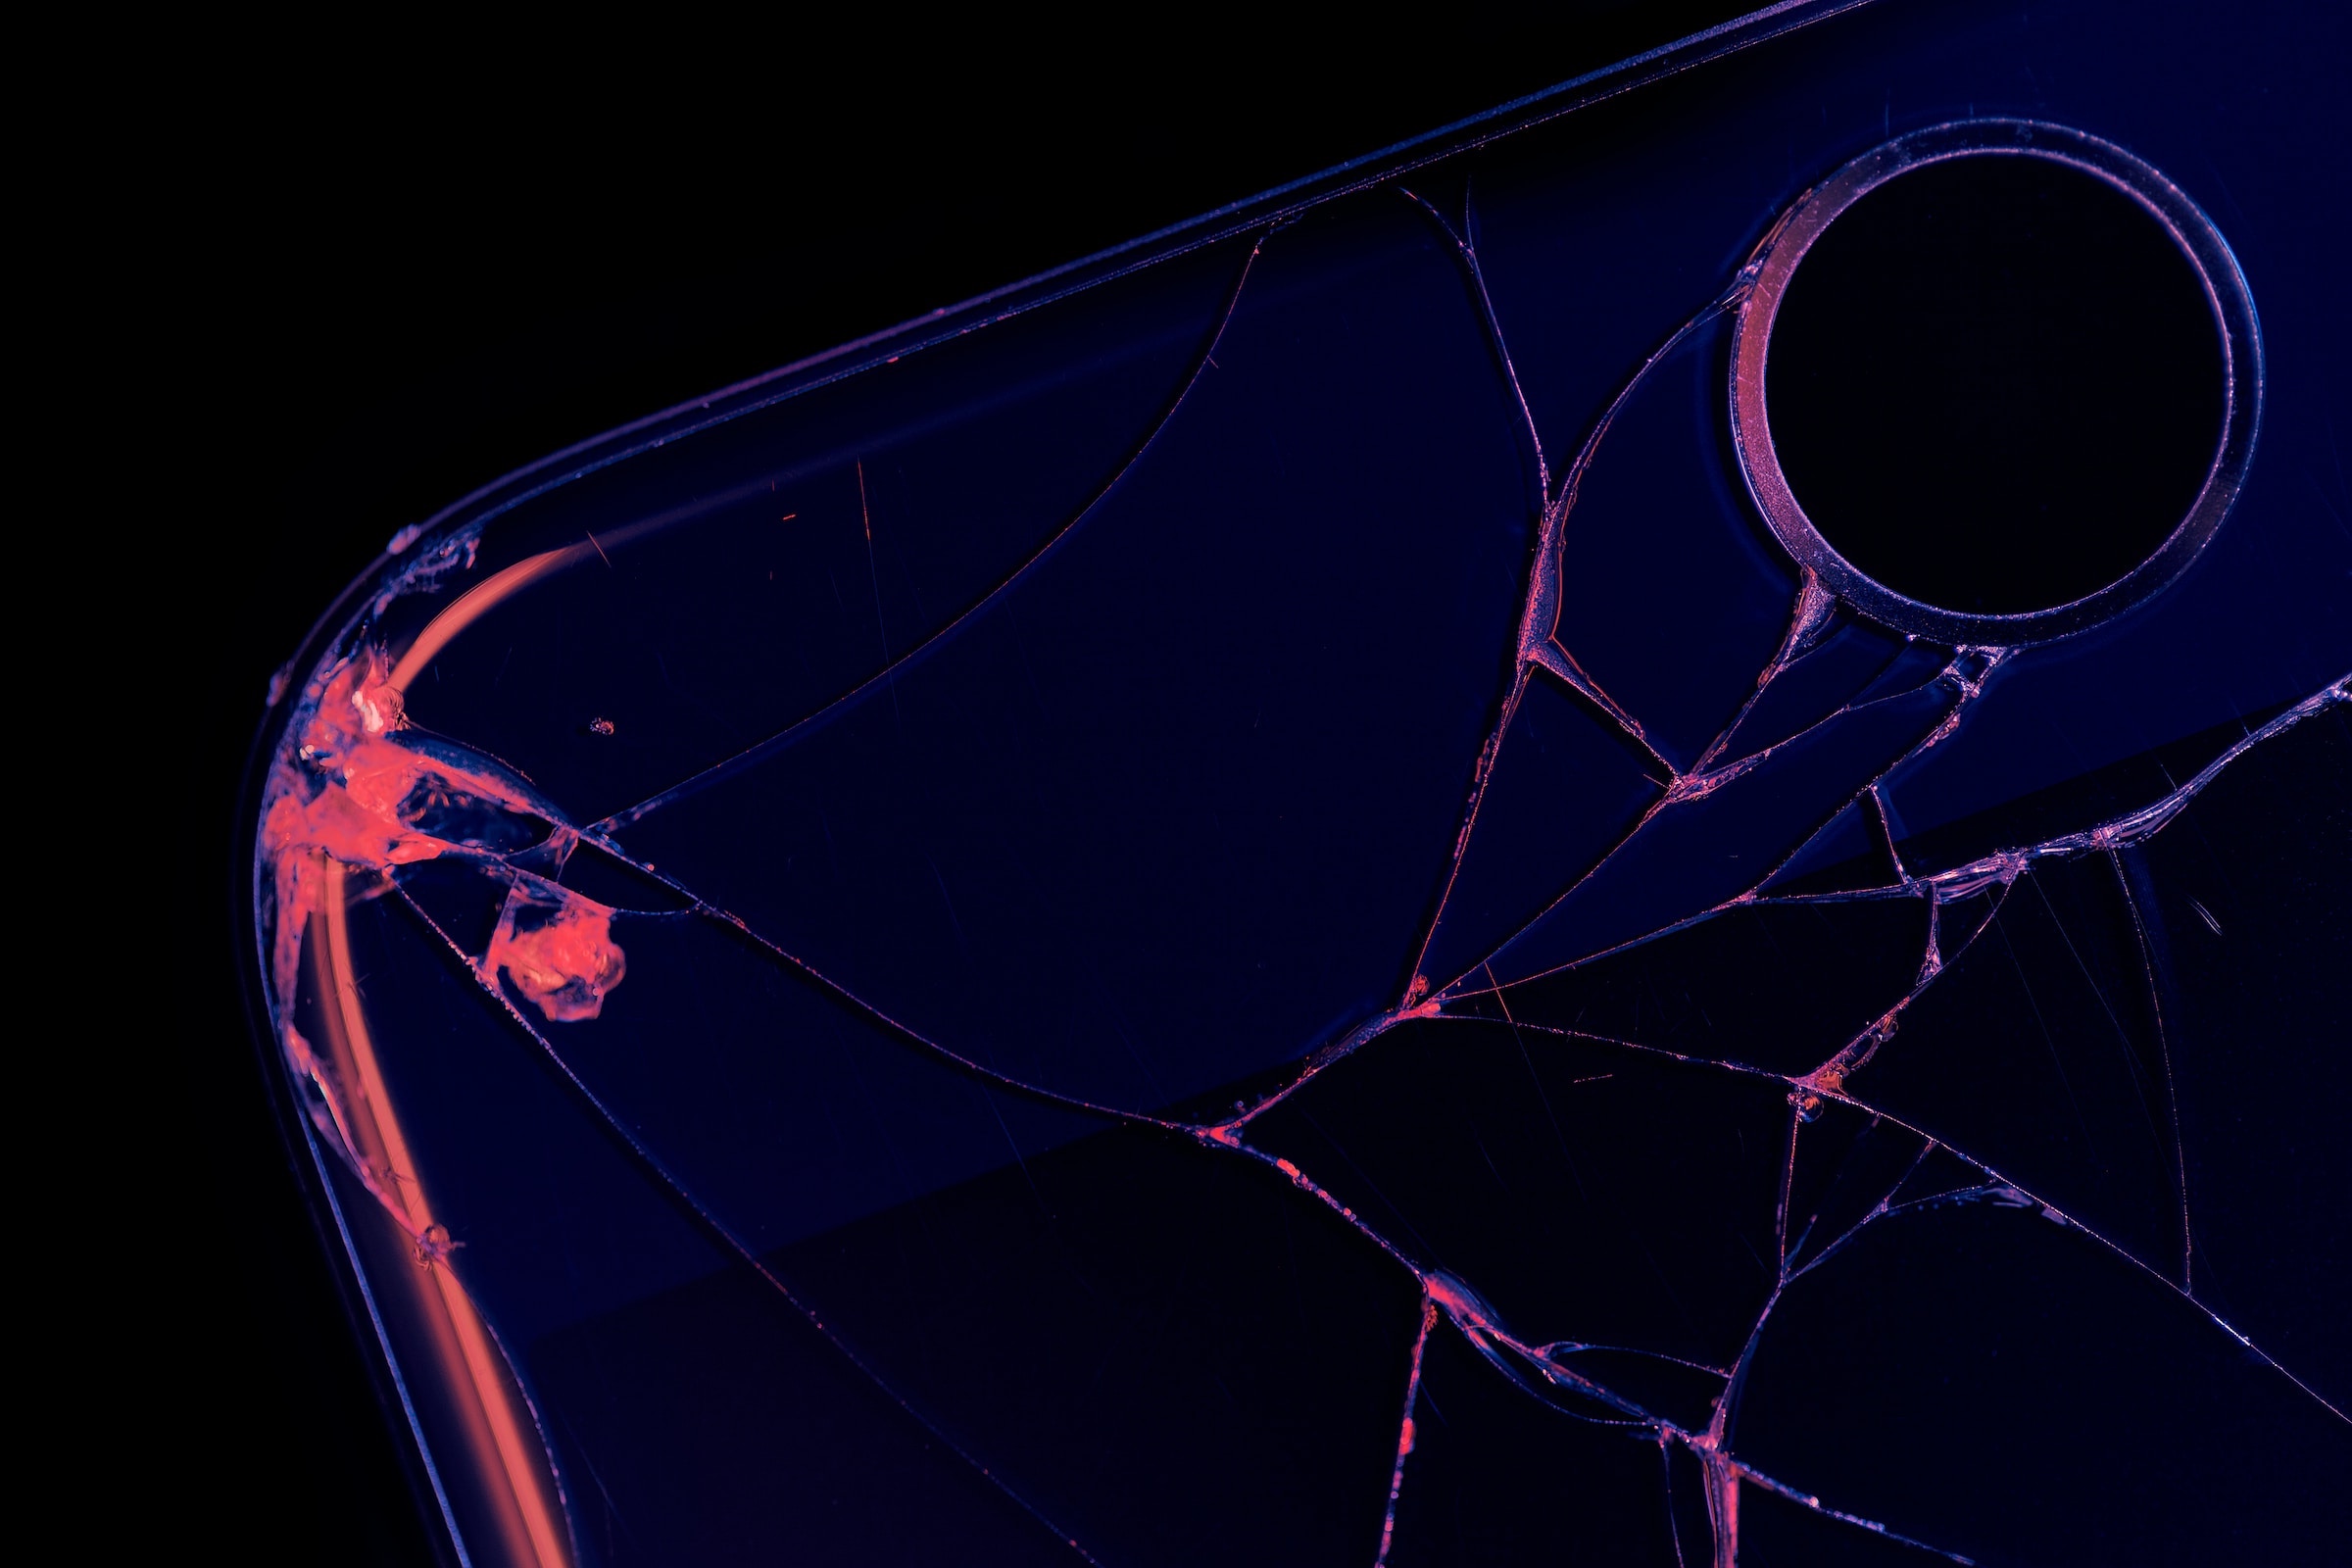 A close-up image of a cracked phone showing the camera lense, in black and neon pink and purple